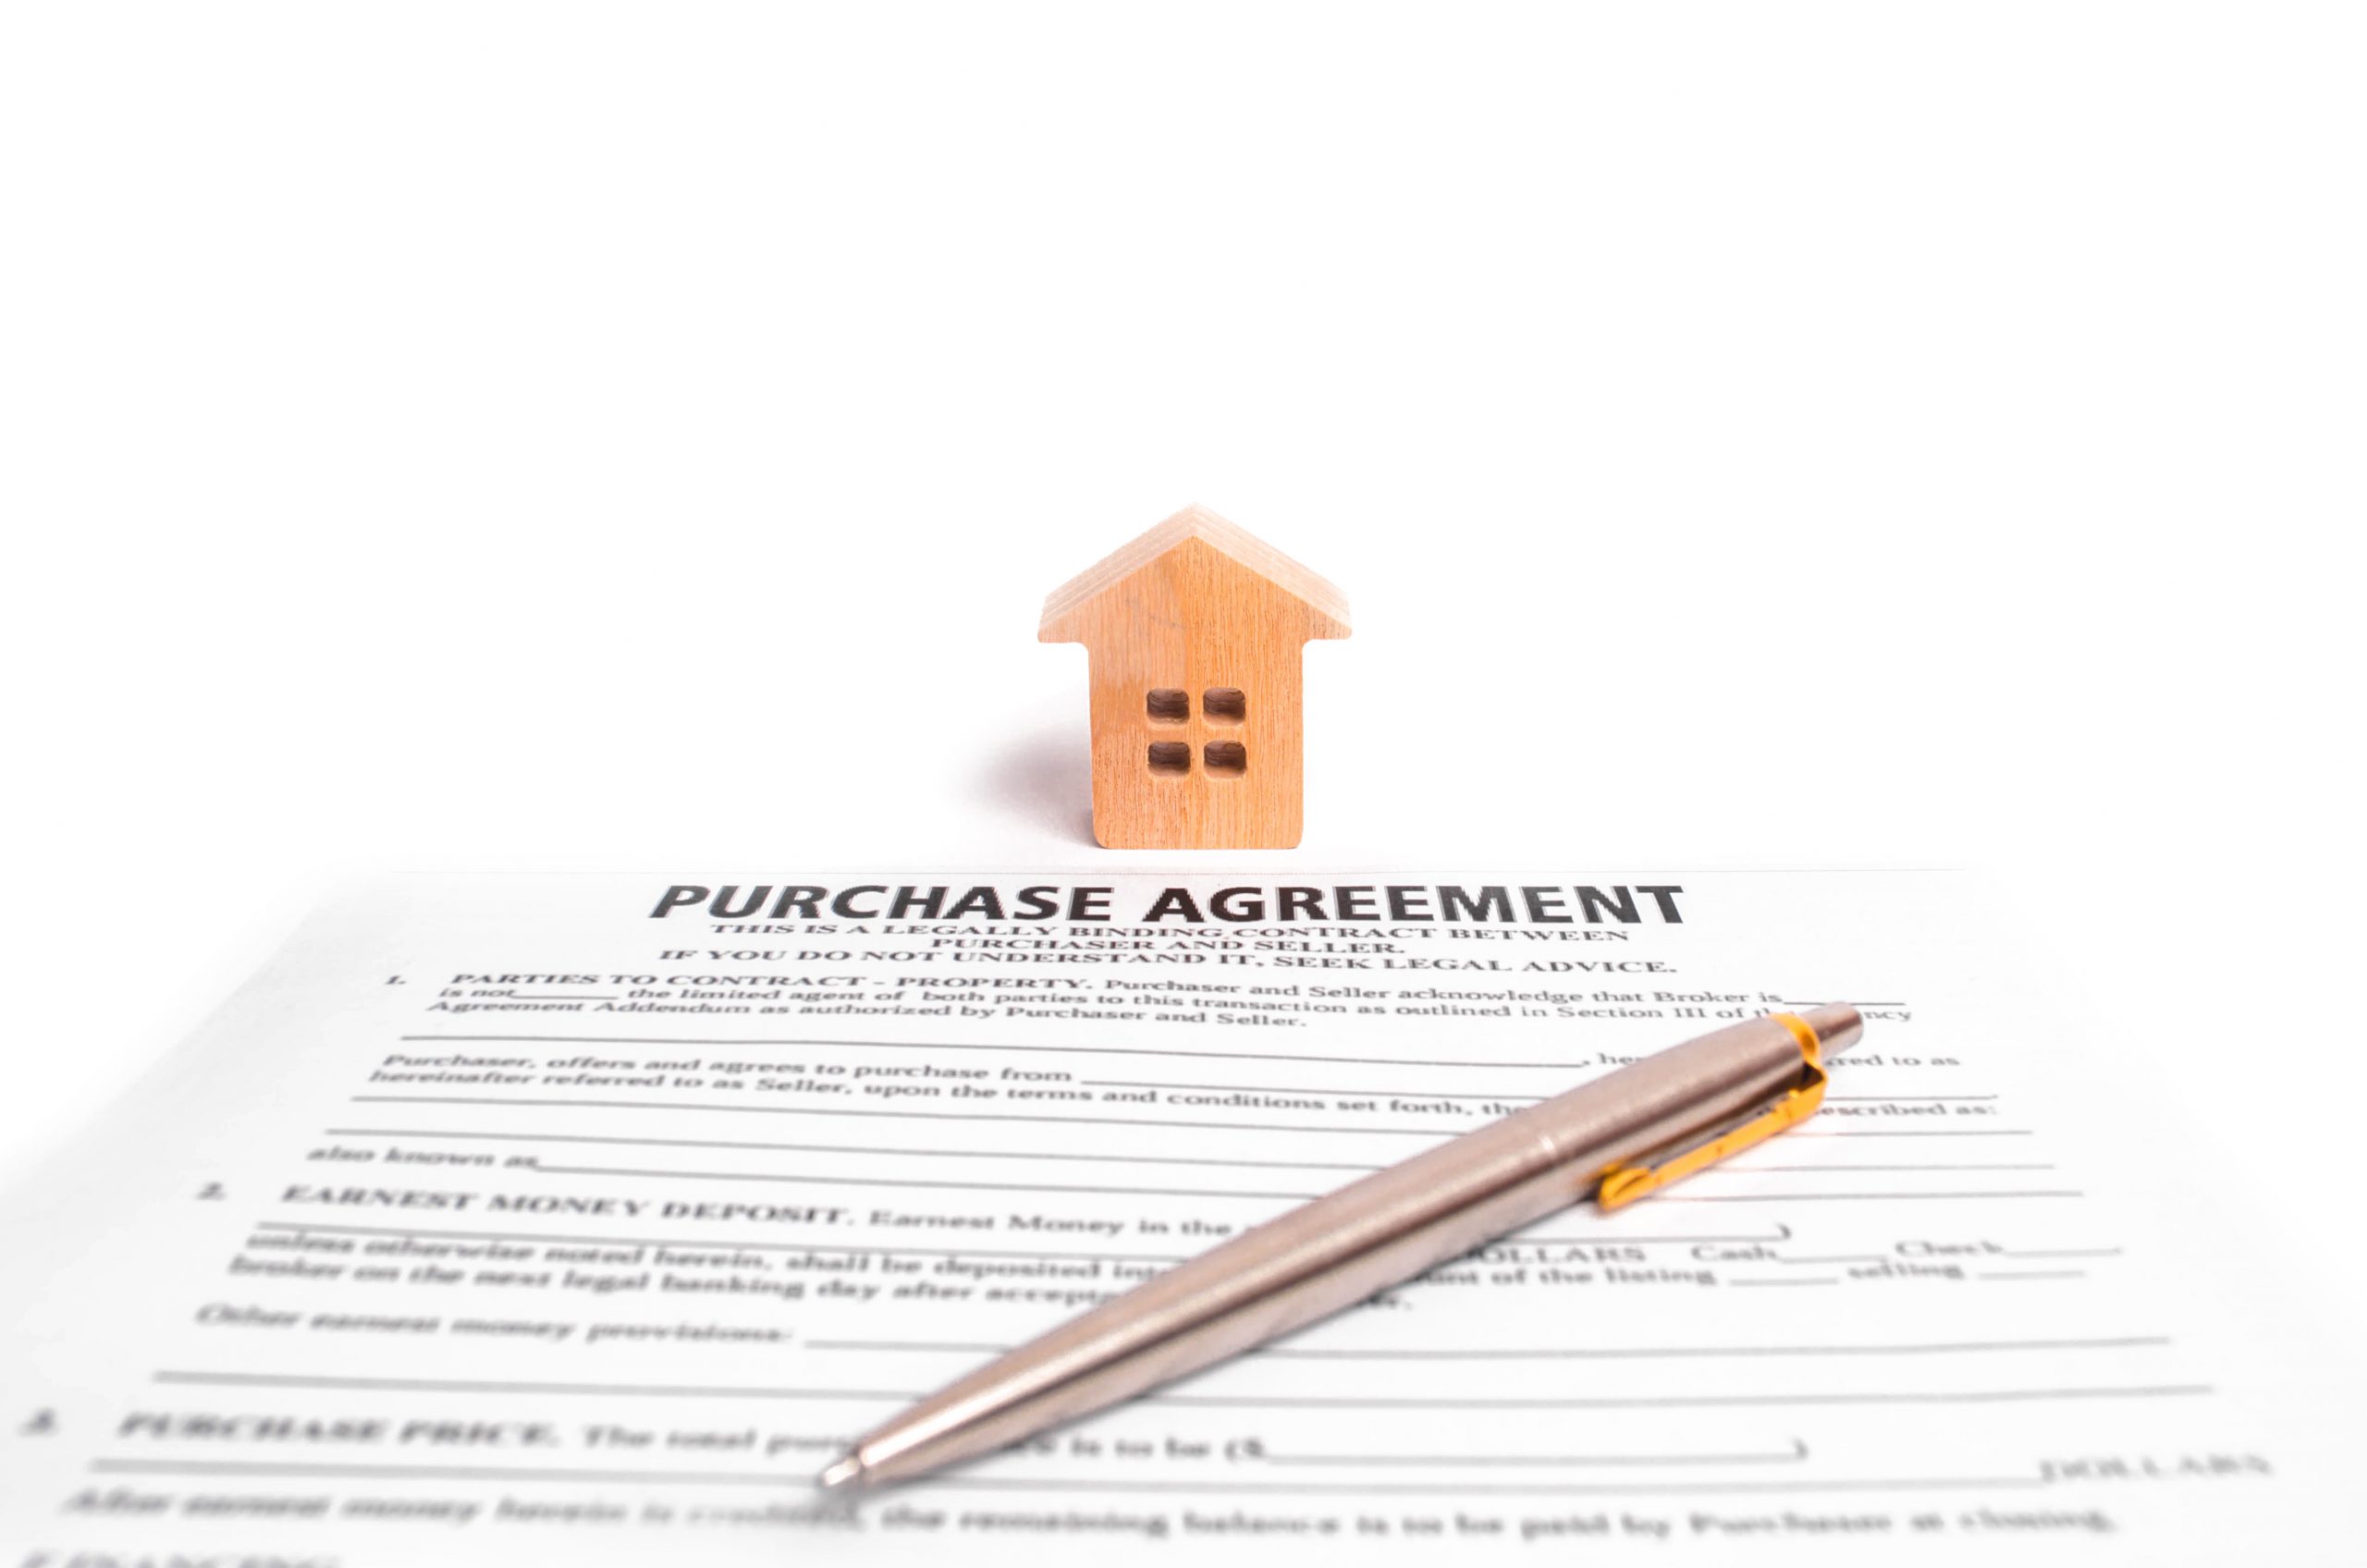 What is the difference between lease option and lease purchase?